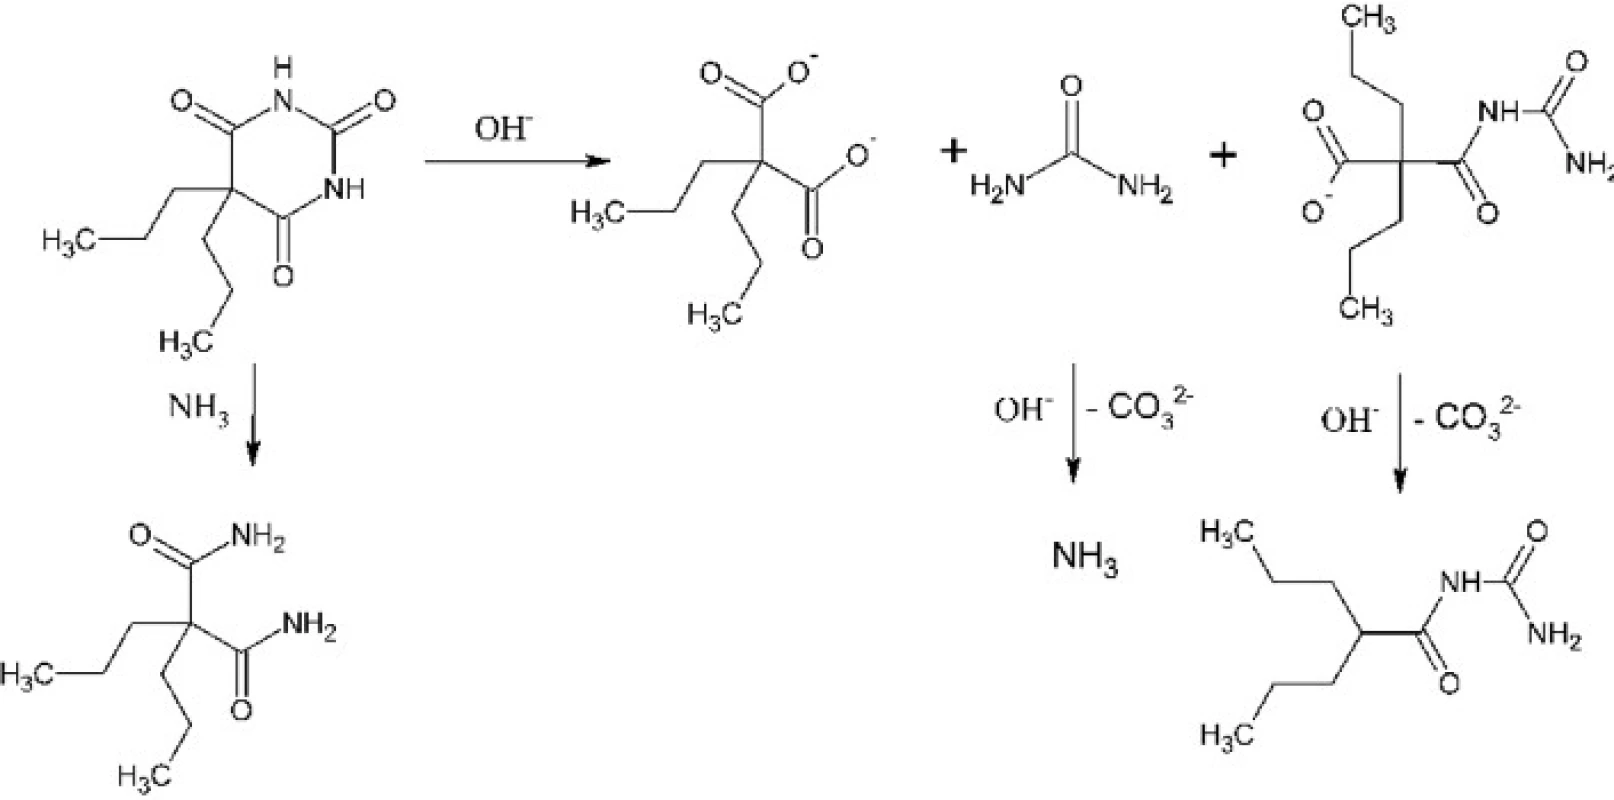 Hydrolysis and other reactions of 5,5-dipropylbarbituric acid in an alkaline hydroxide solution